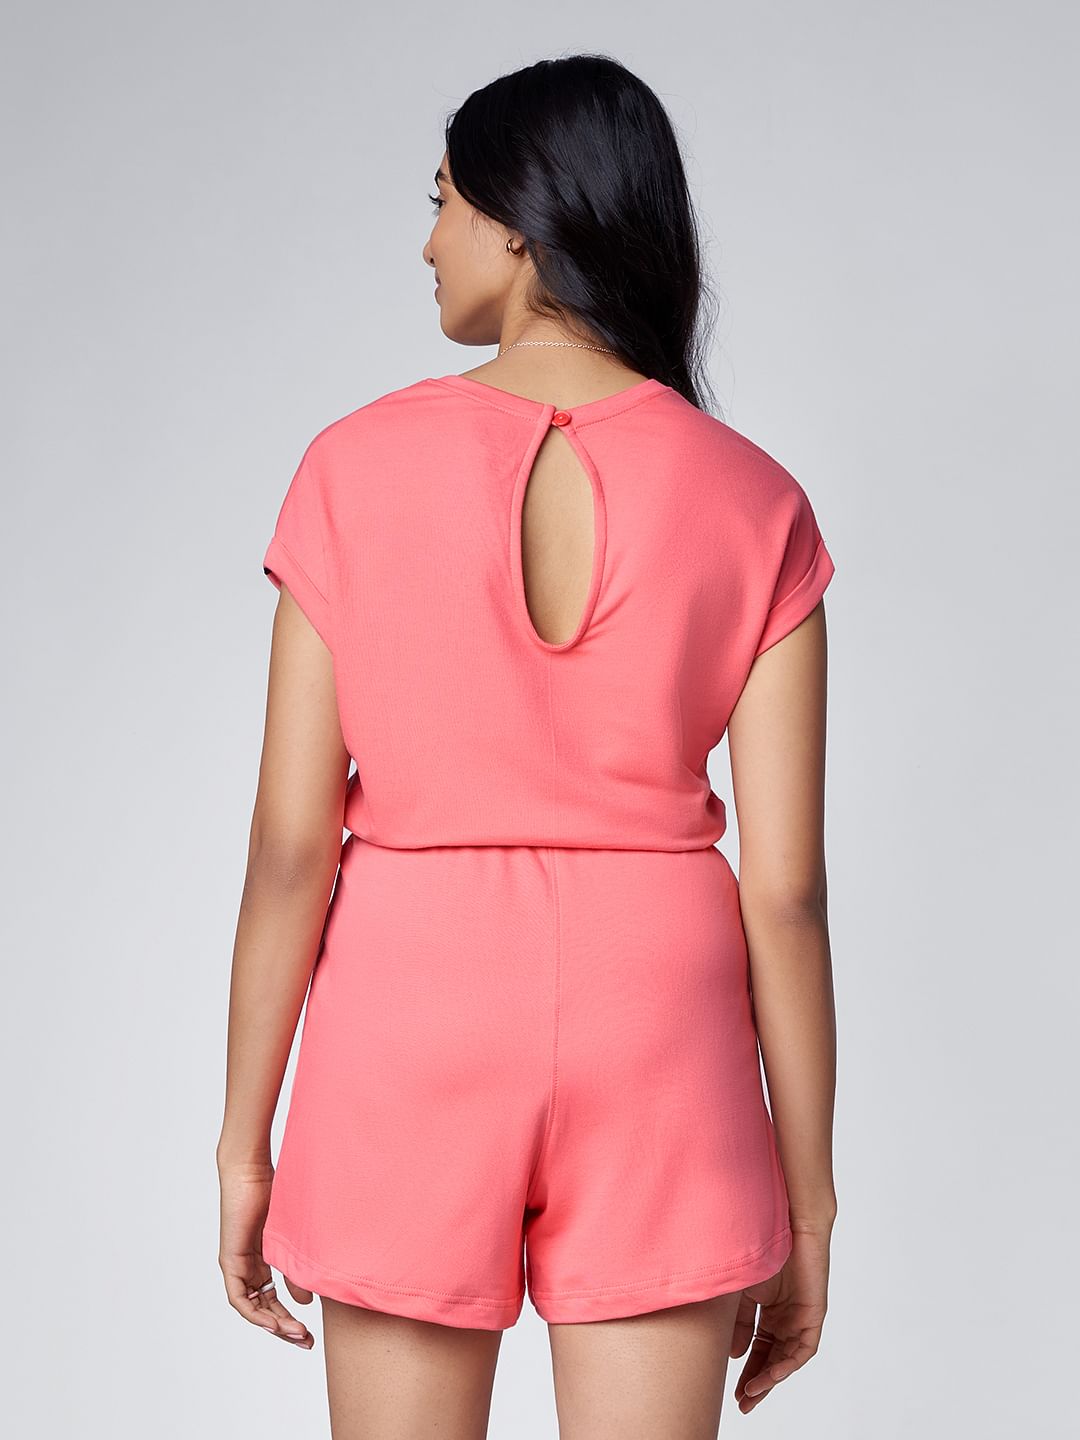 Solids: Coral Pink